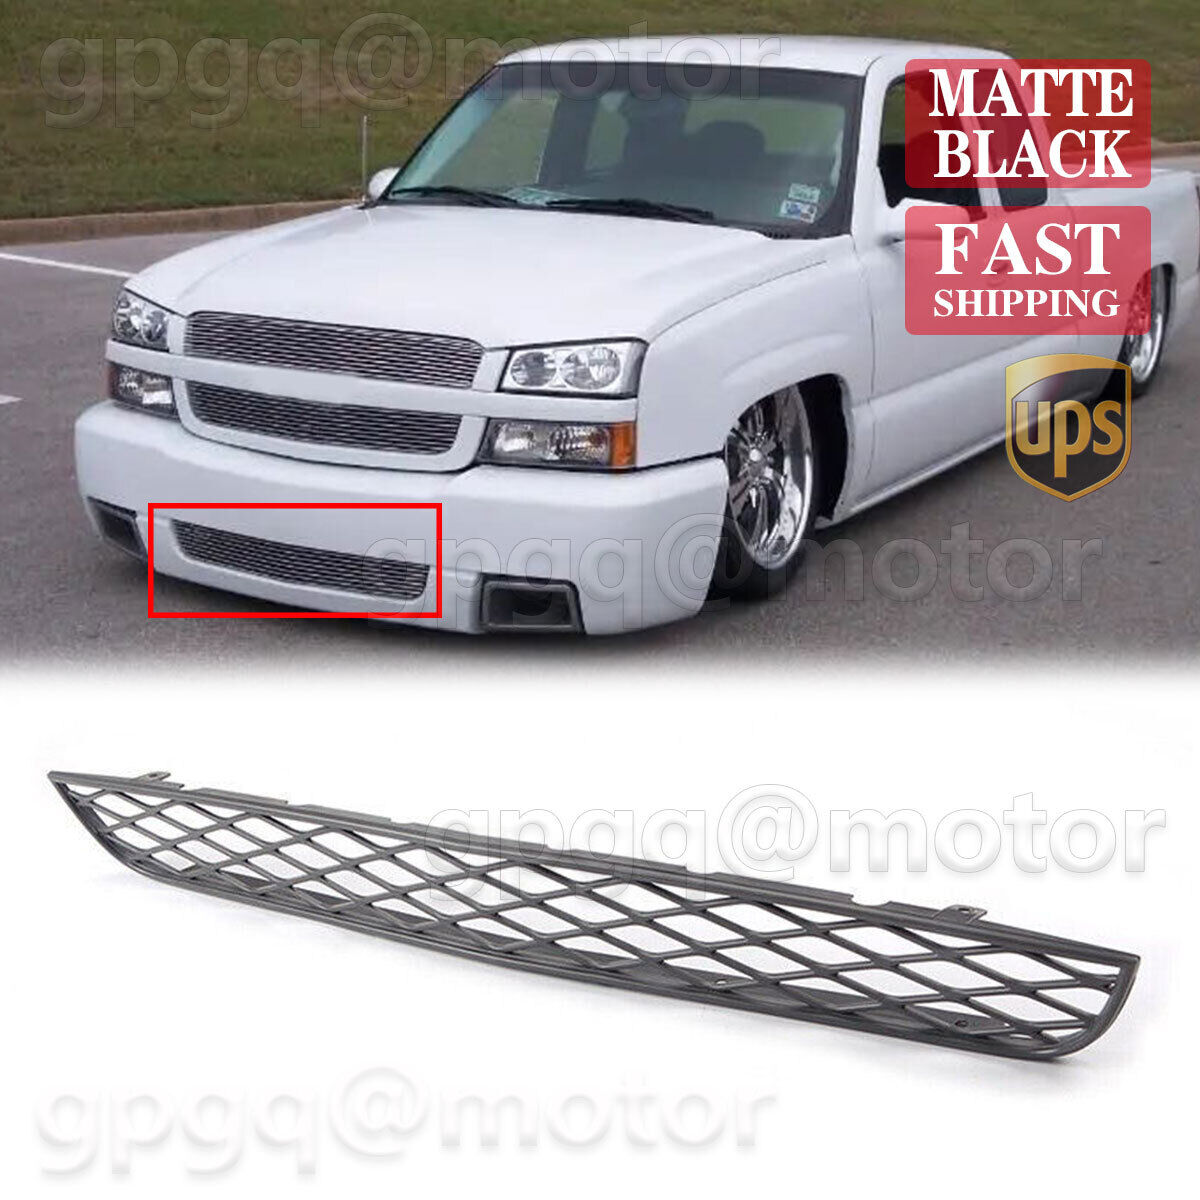 For Chevrolet Silverado 1500 SS Models 2003-2004 05 Textured Front Lower Grille